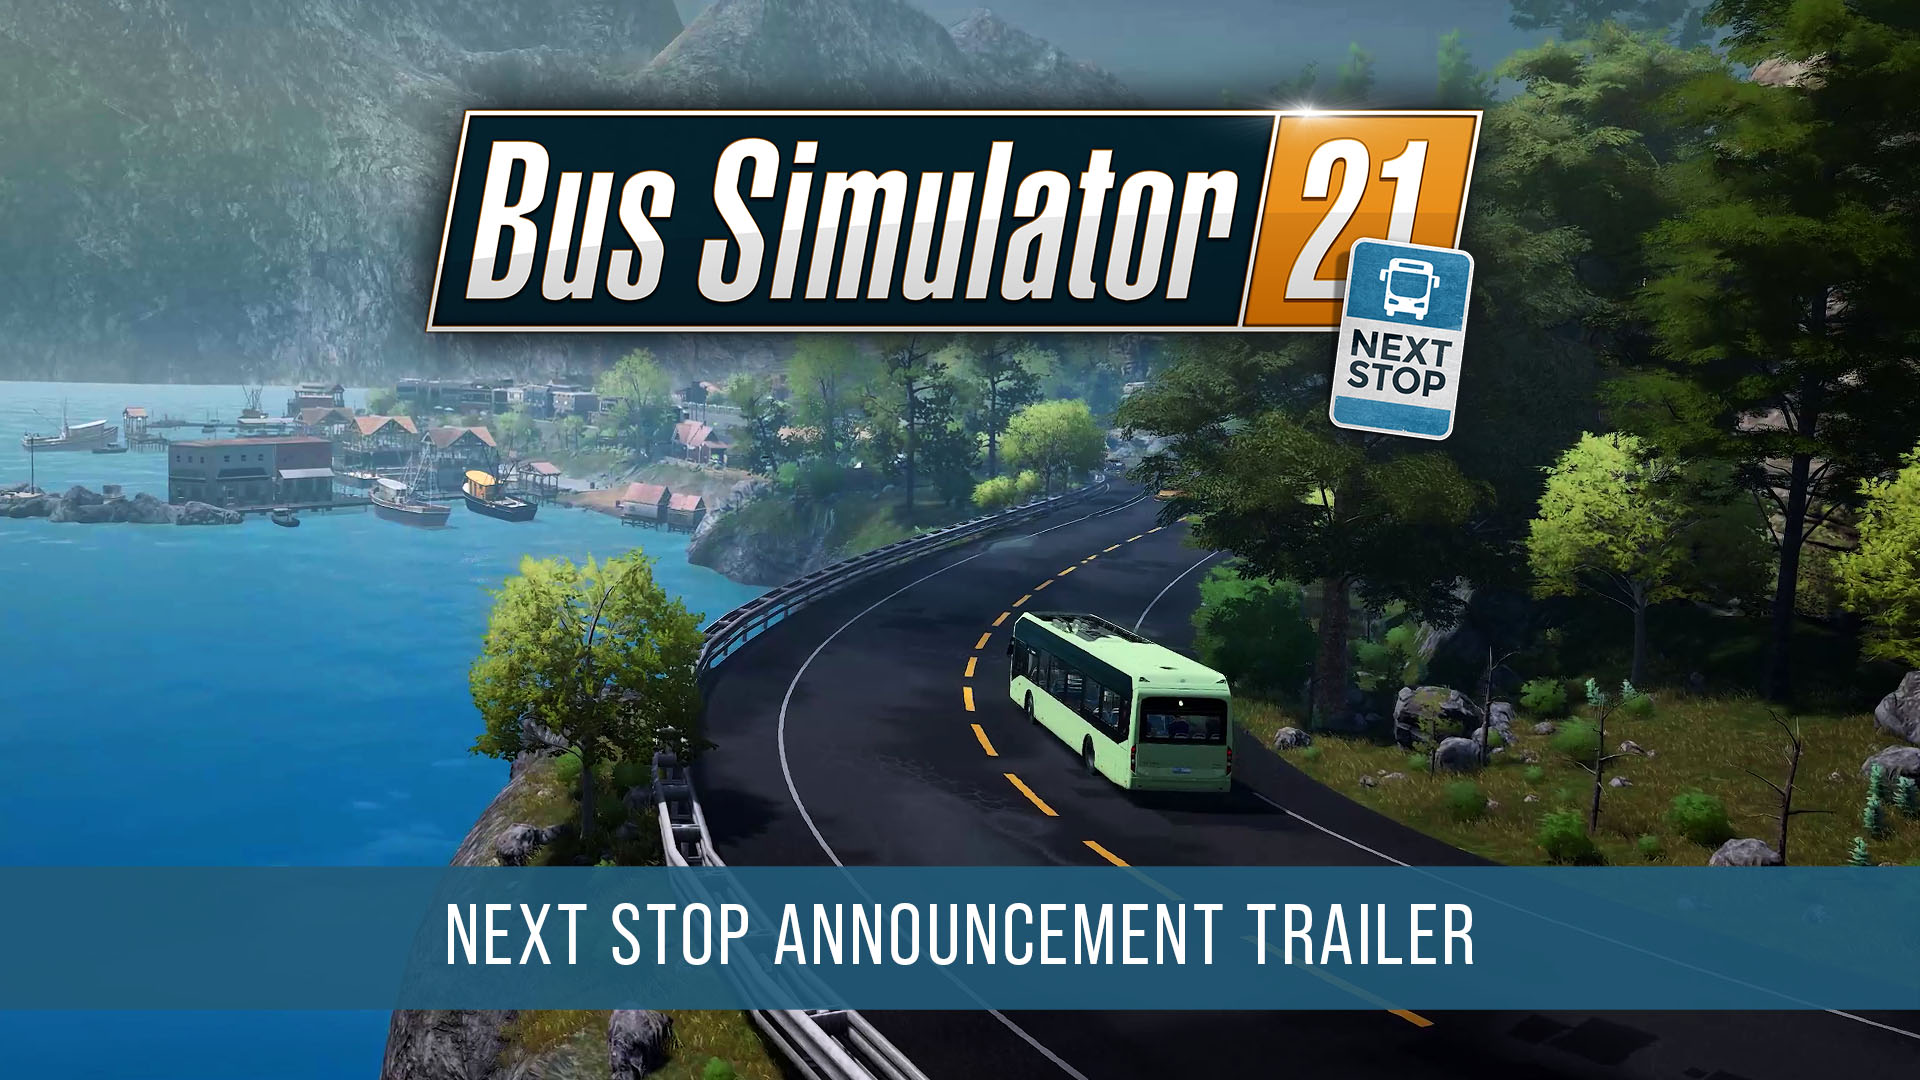 Update, Mode, Stop: Simulator and Map Edition, Gen, Big Next Bus 21 Expansion, Career Next Gold